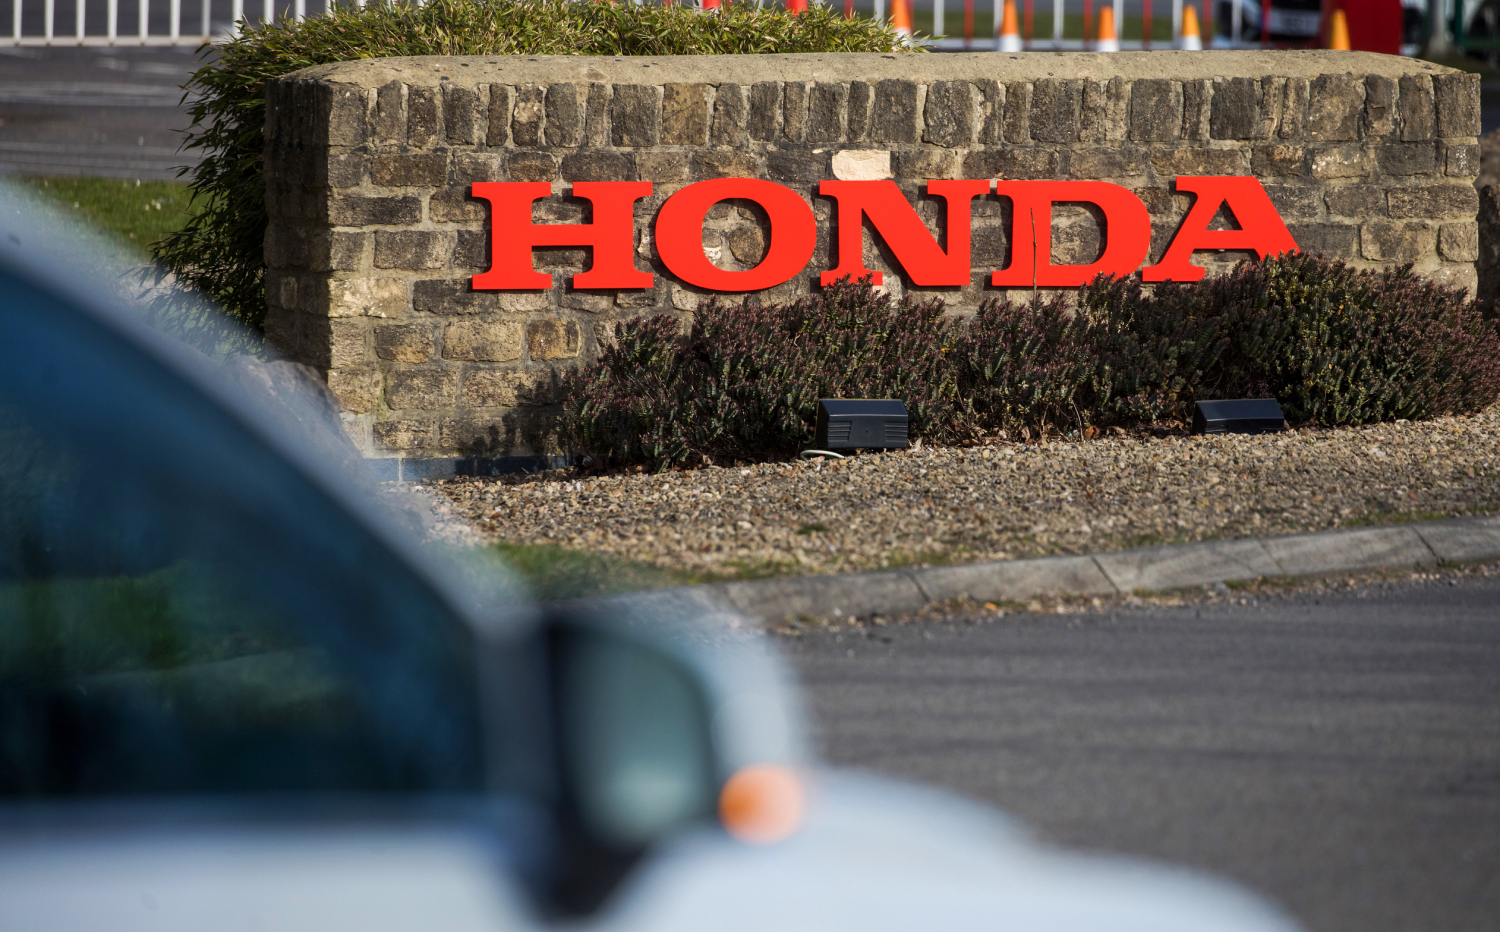 A Honda factory sign in the distance